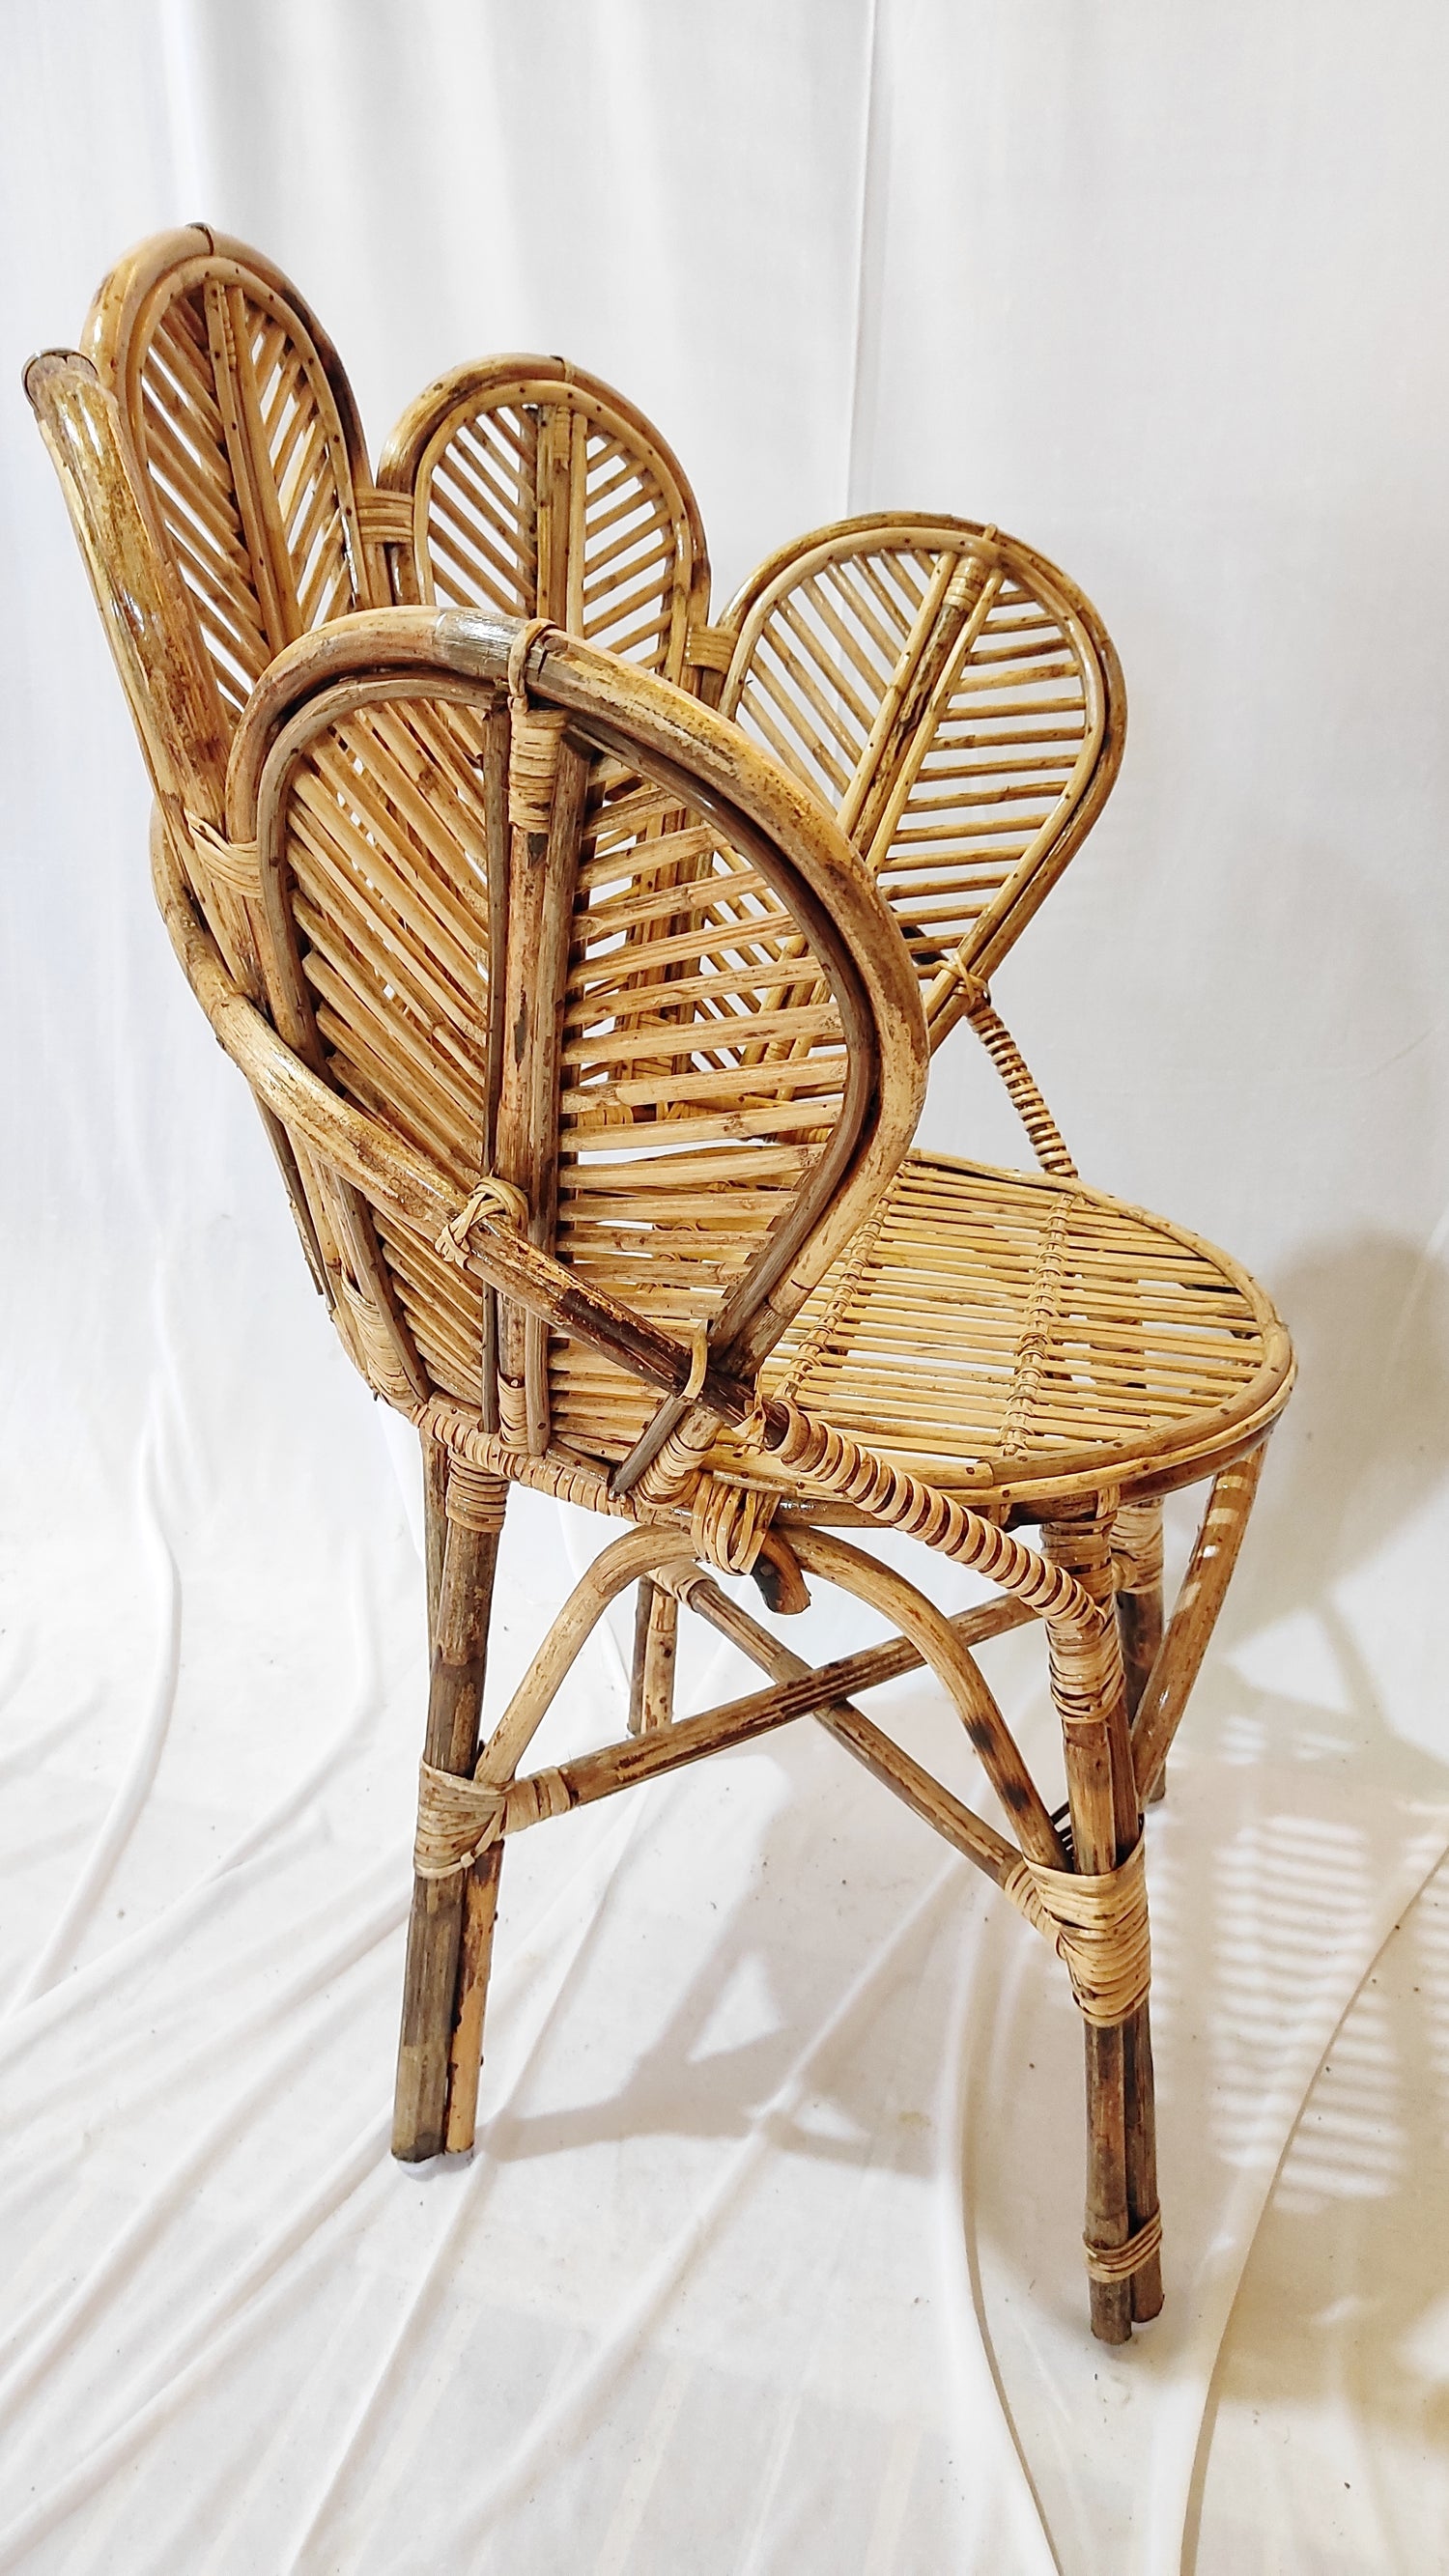 Cane Flower chair and table set